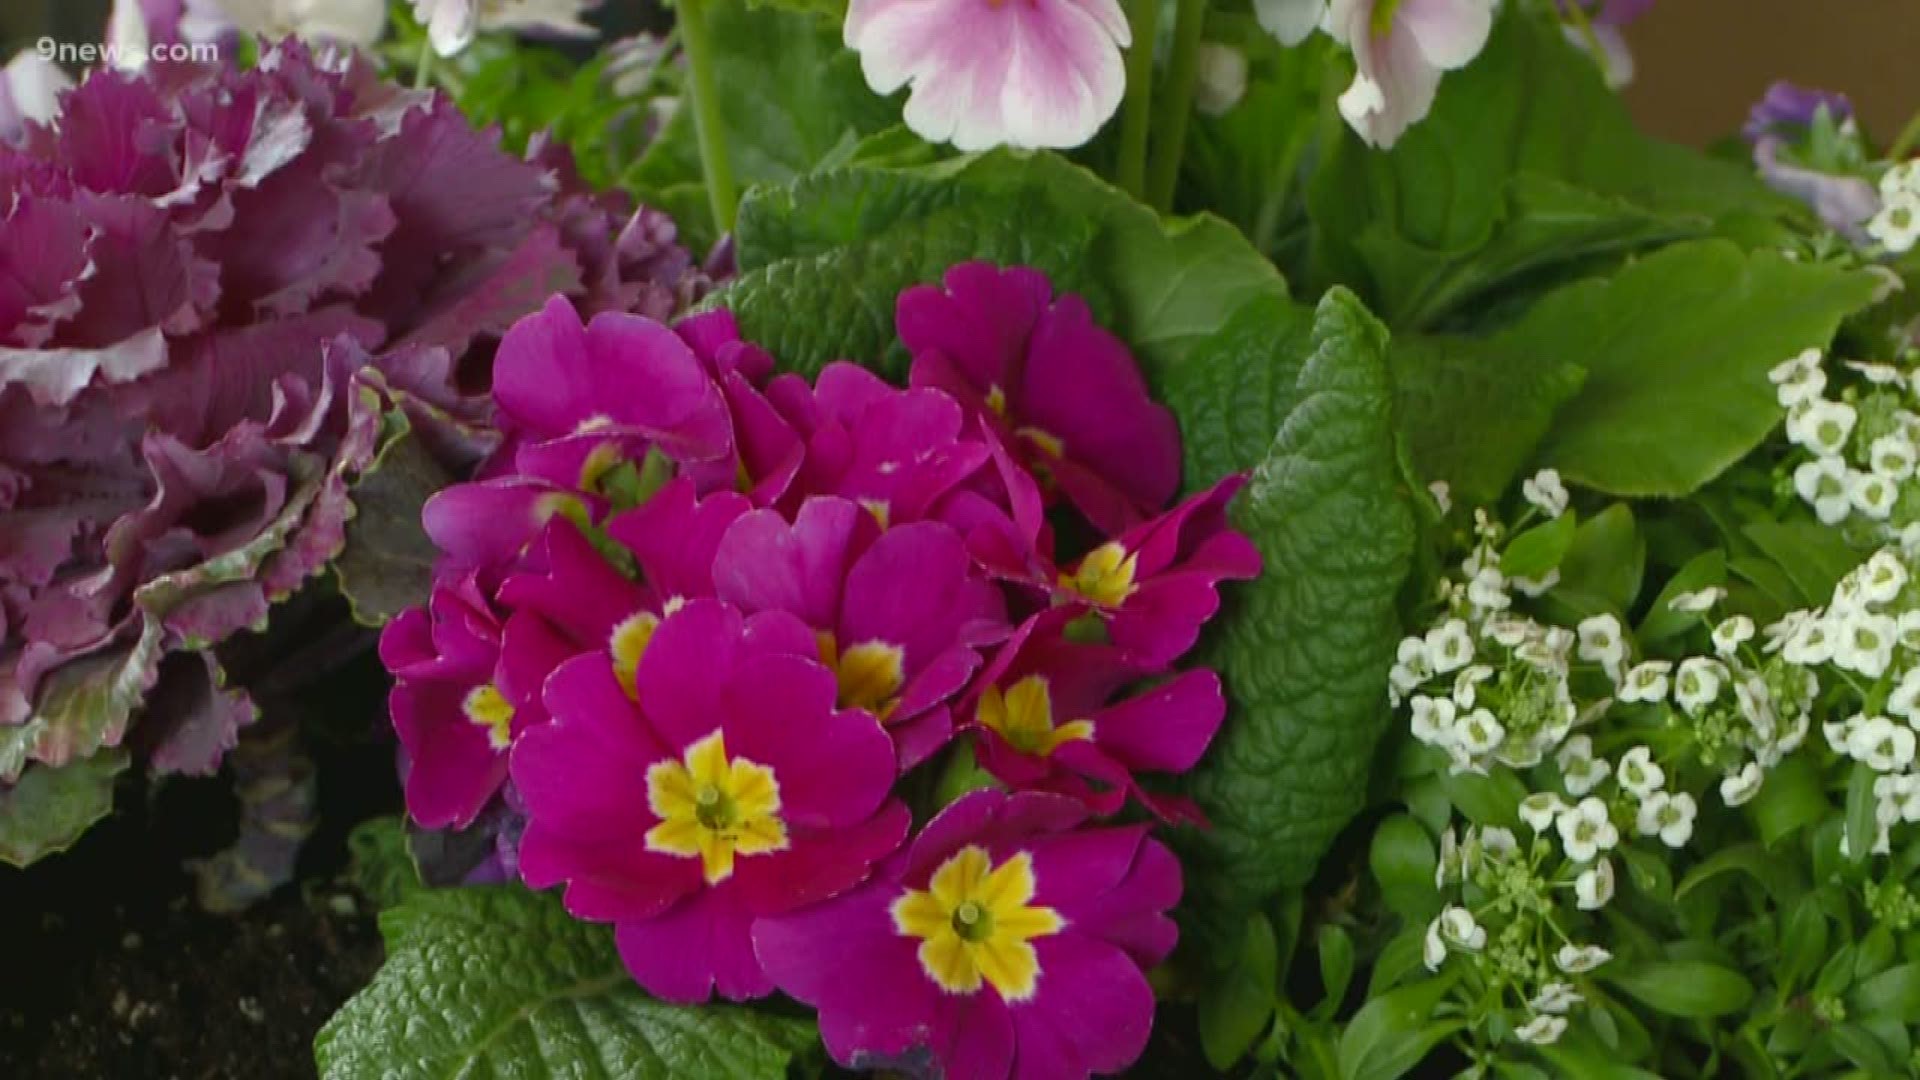 Here are some tips on how to make your own shade planter box at home. 9NEWS Garden Expert Rob Proctor has the details.